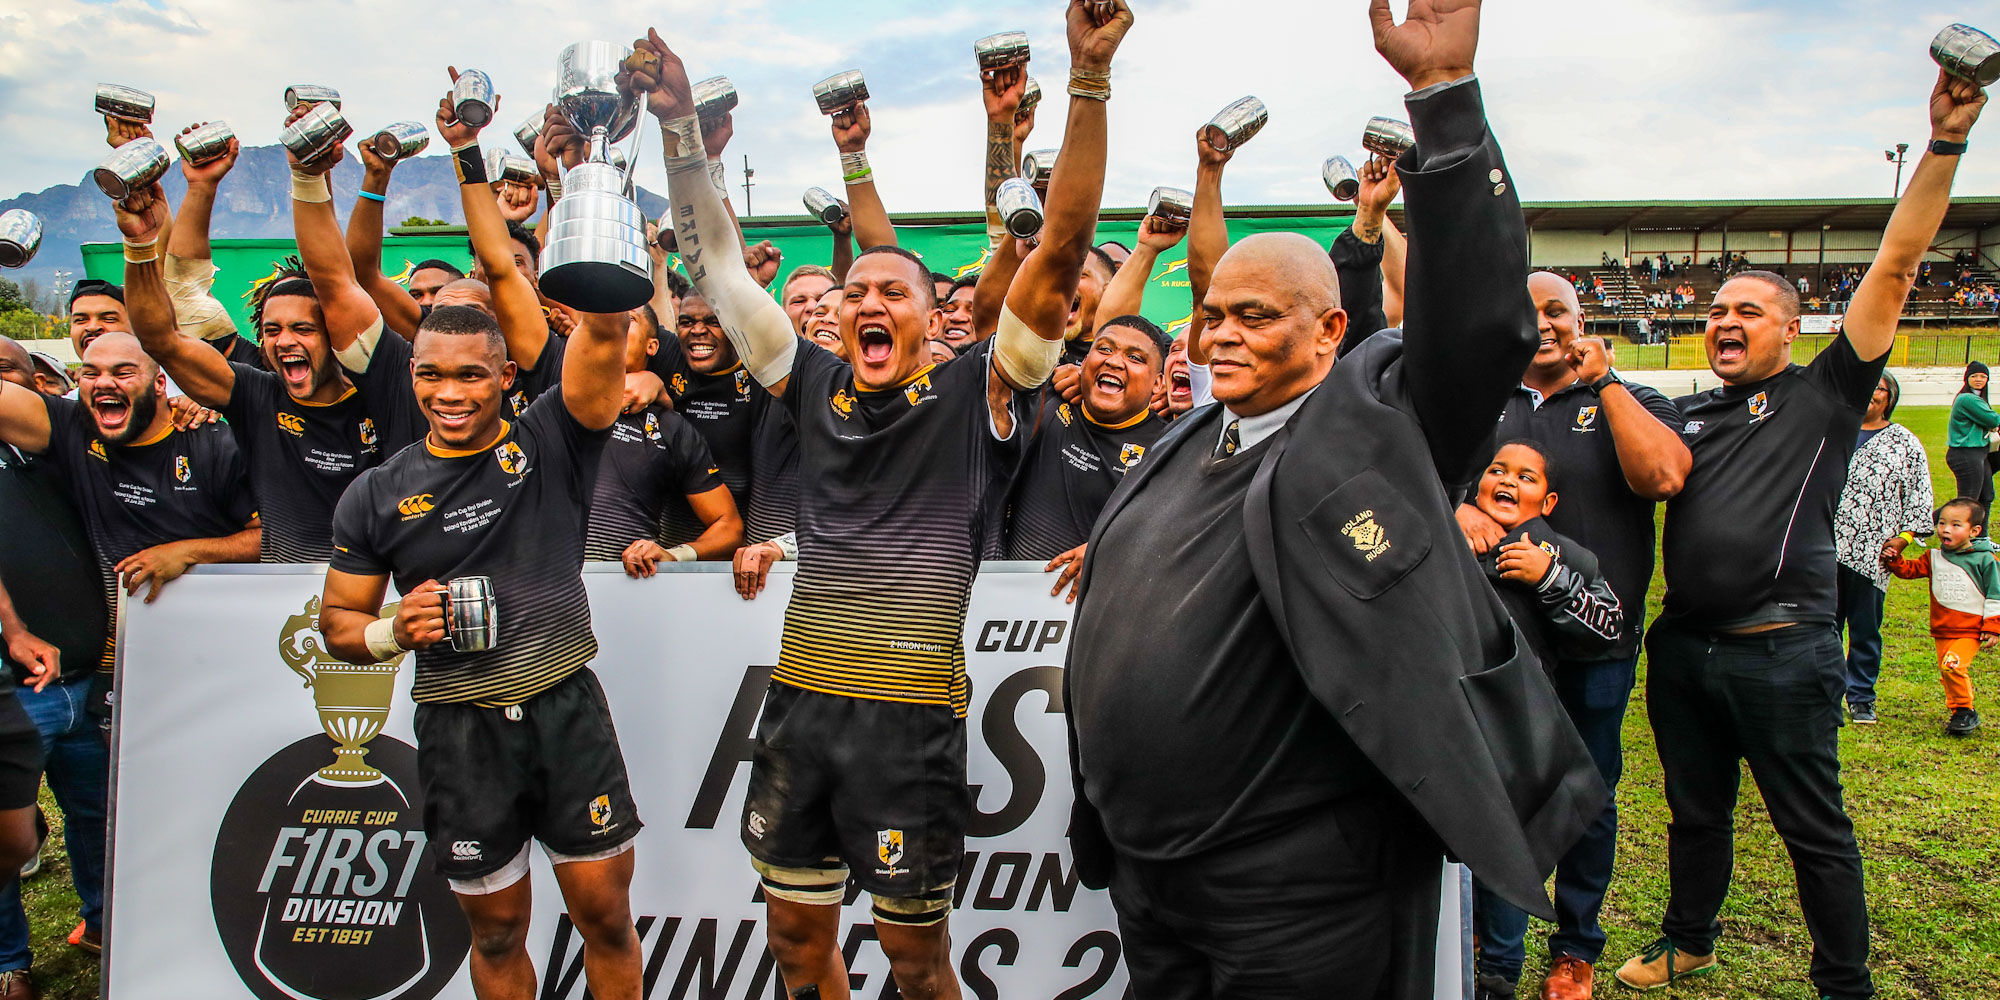 The Boland Kavaliers won the Currie Cup First Division this year.